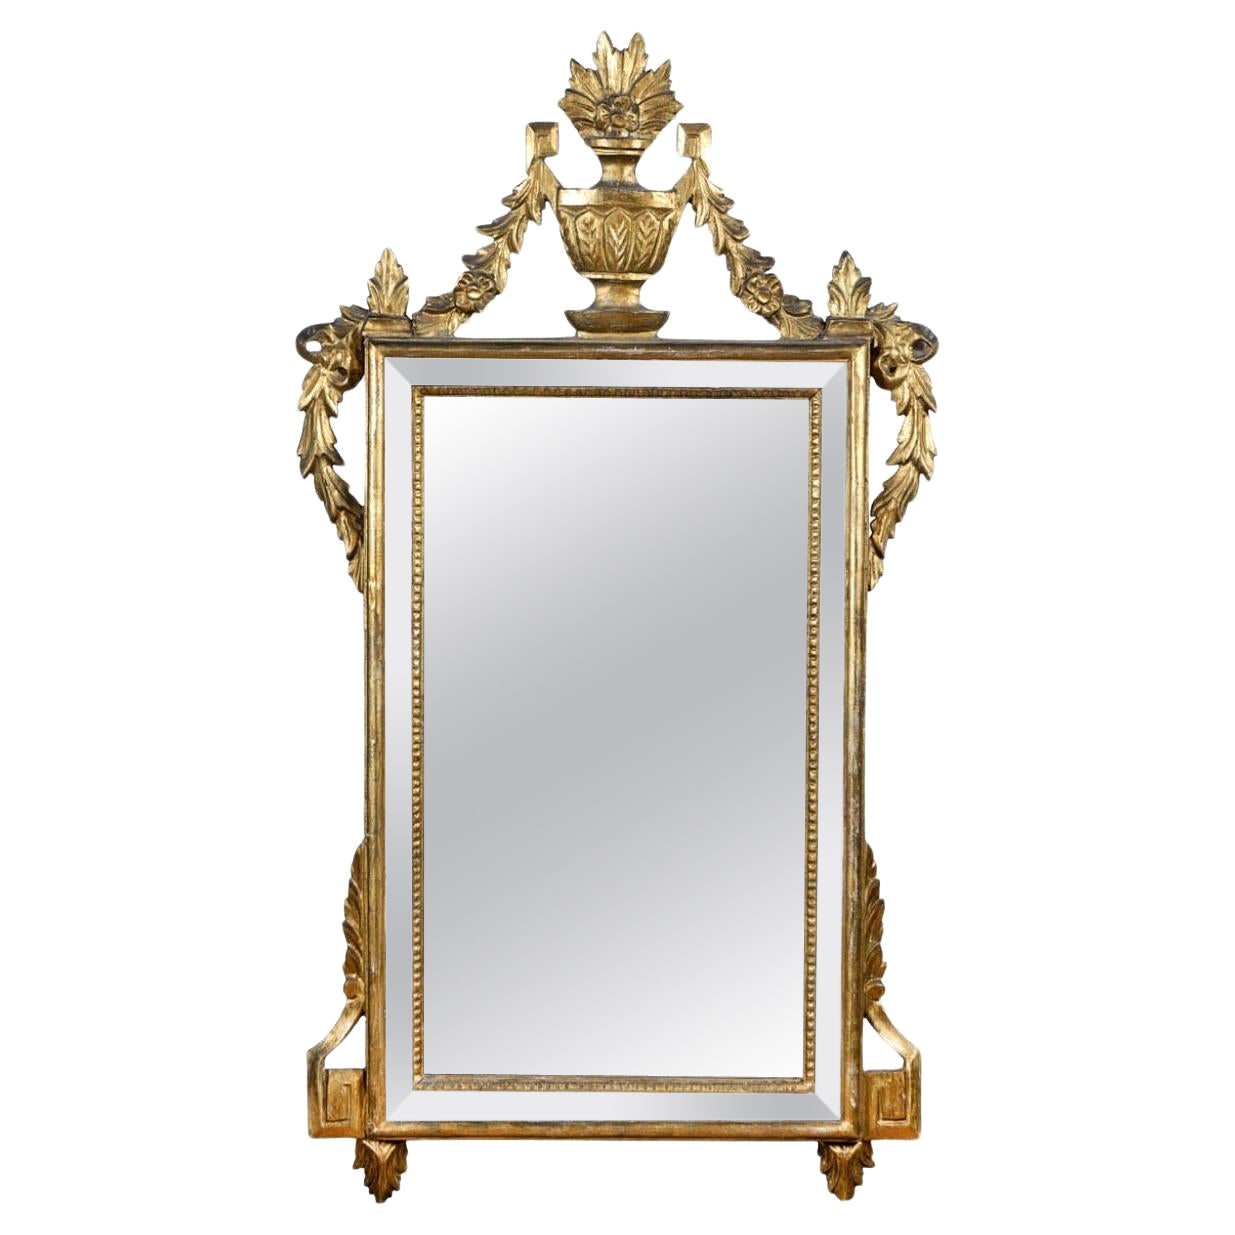 Louis XVI Style Handcarved Giltwood Mirror painted in White